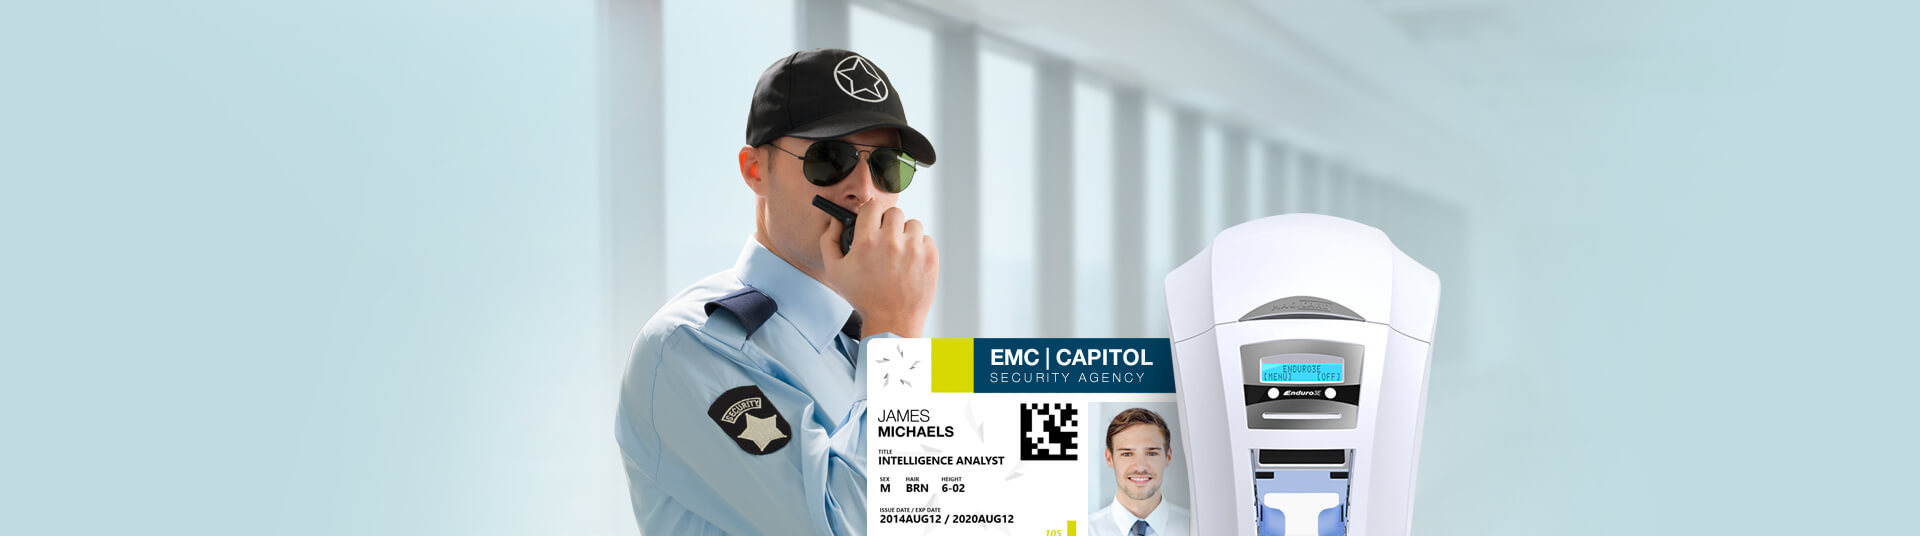 Security ID Badges